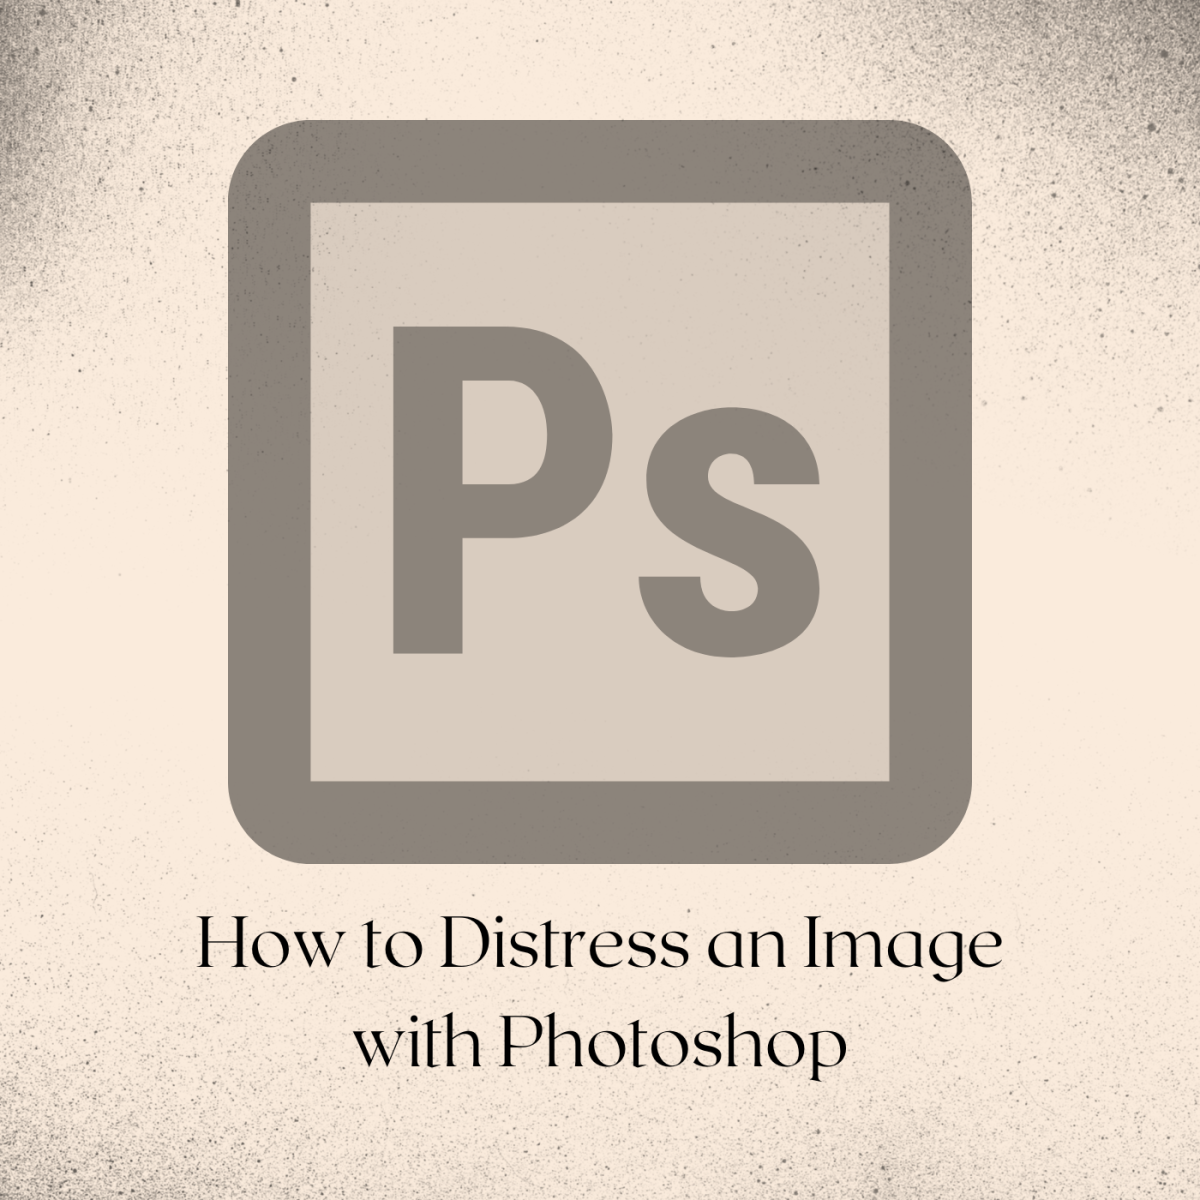 How to Distress an Image: Step-by-Step Photoshop Tutorial